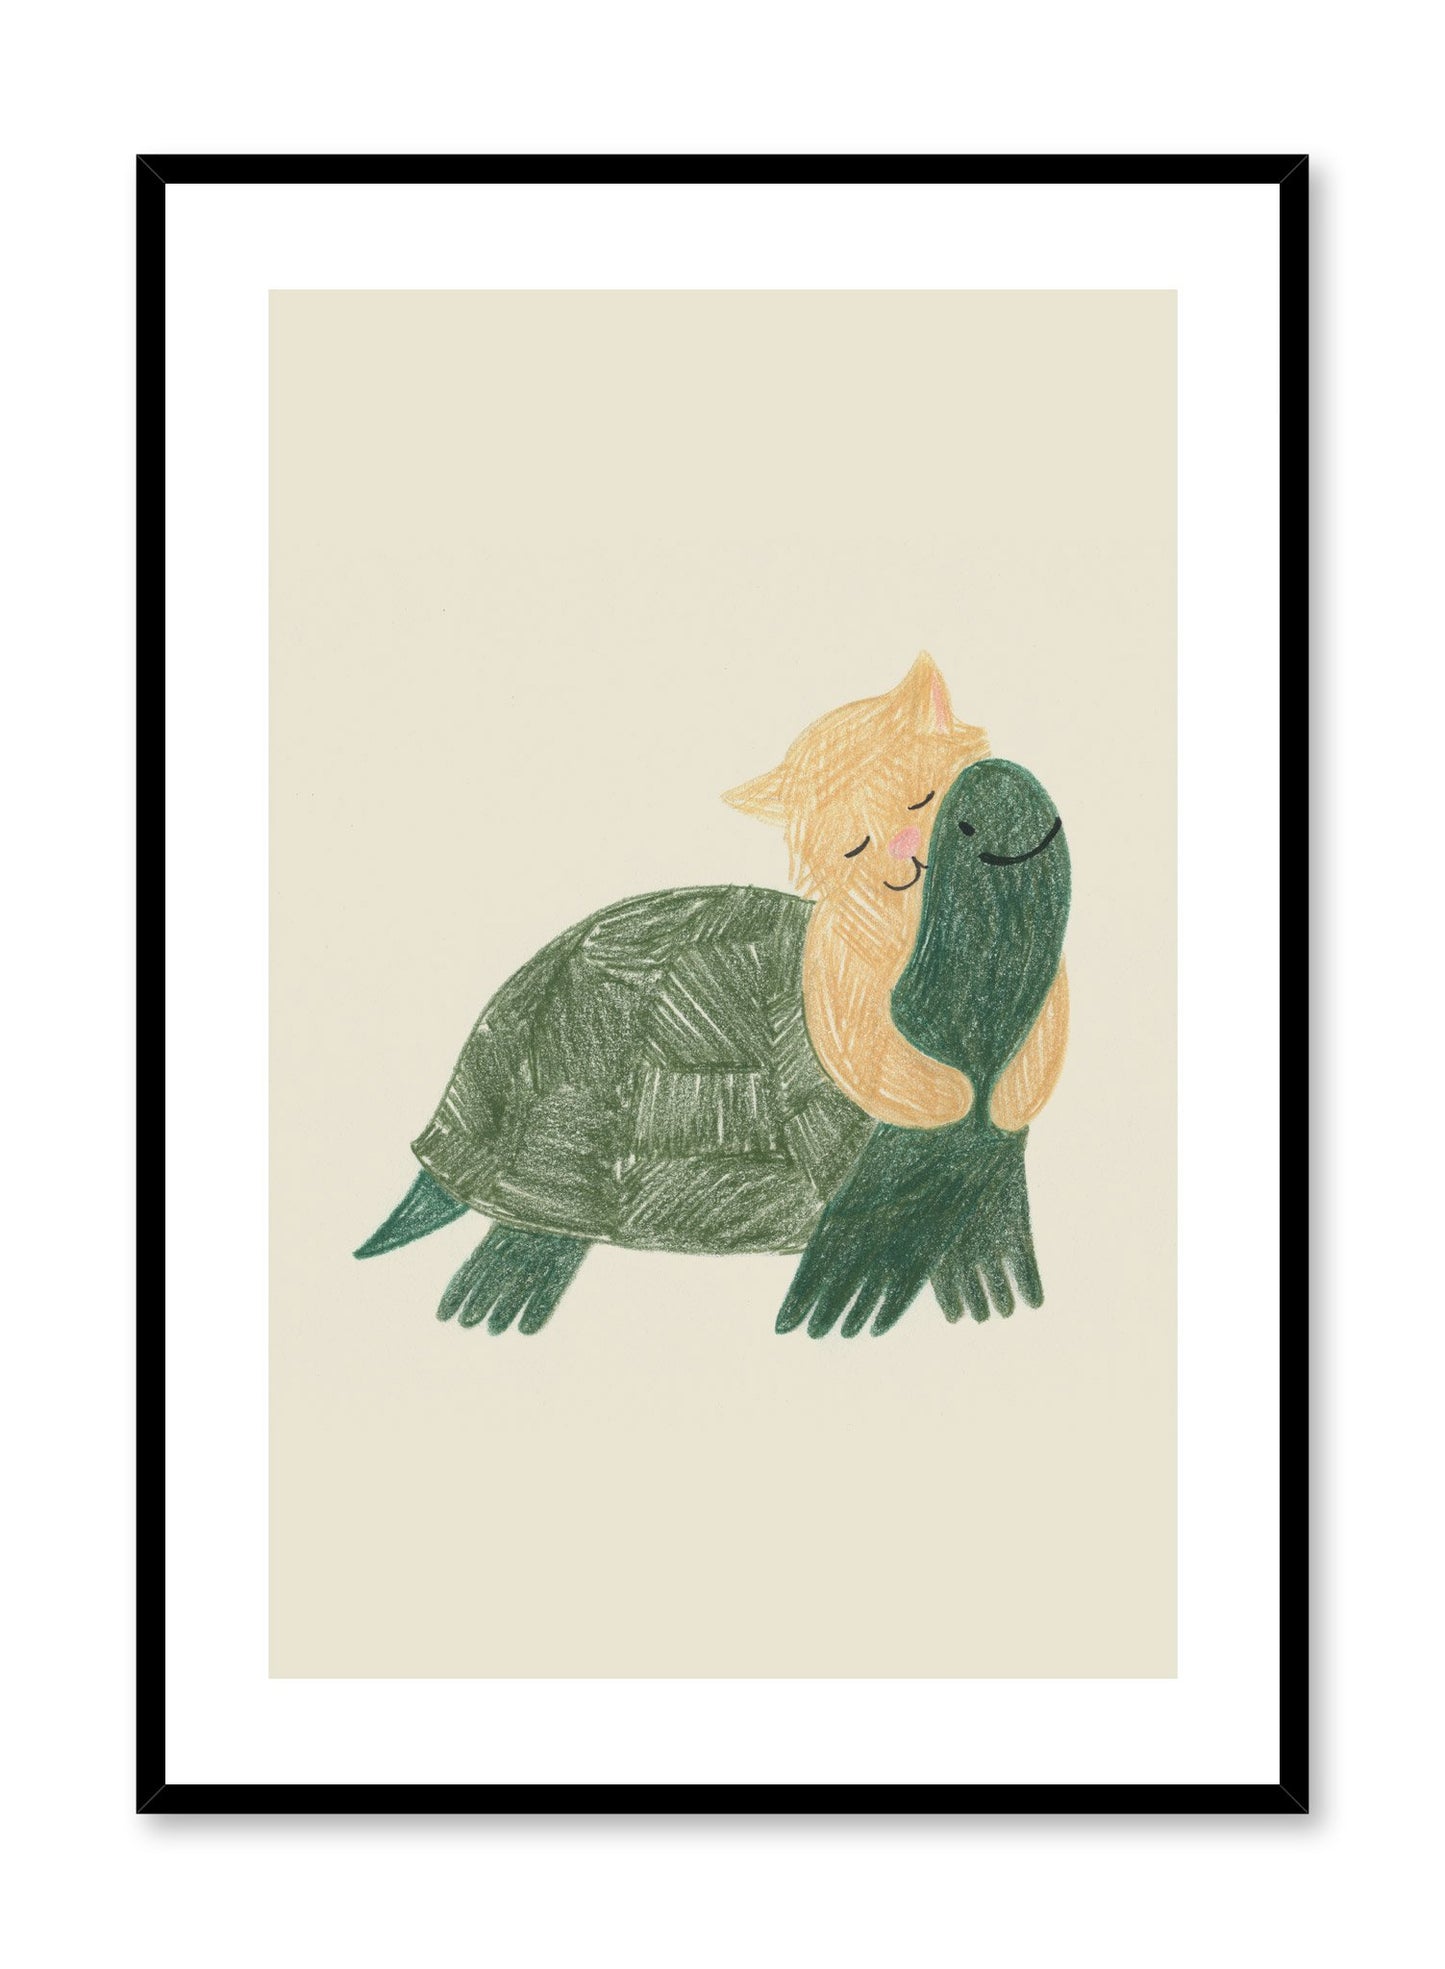 Kids nursery illustration poster by Opposite Wall with tortoise and cat hugging